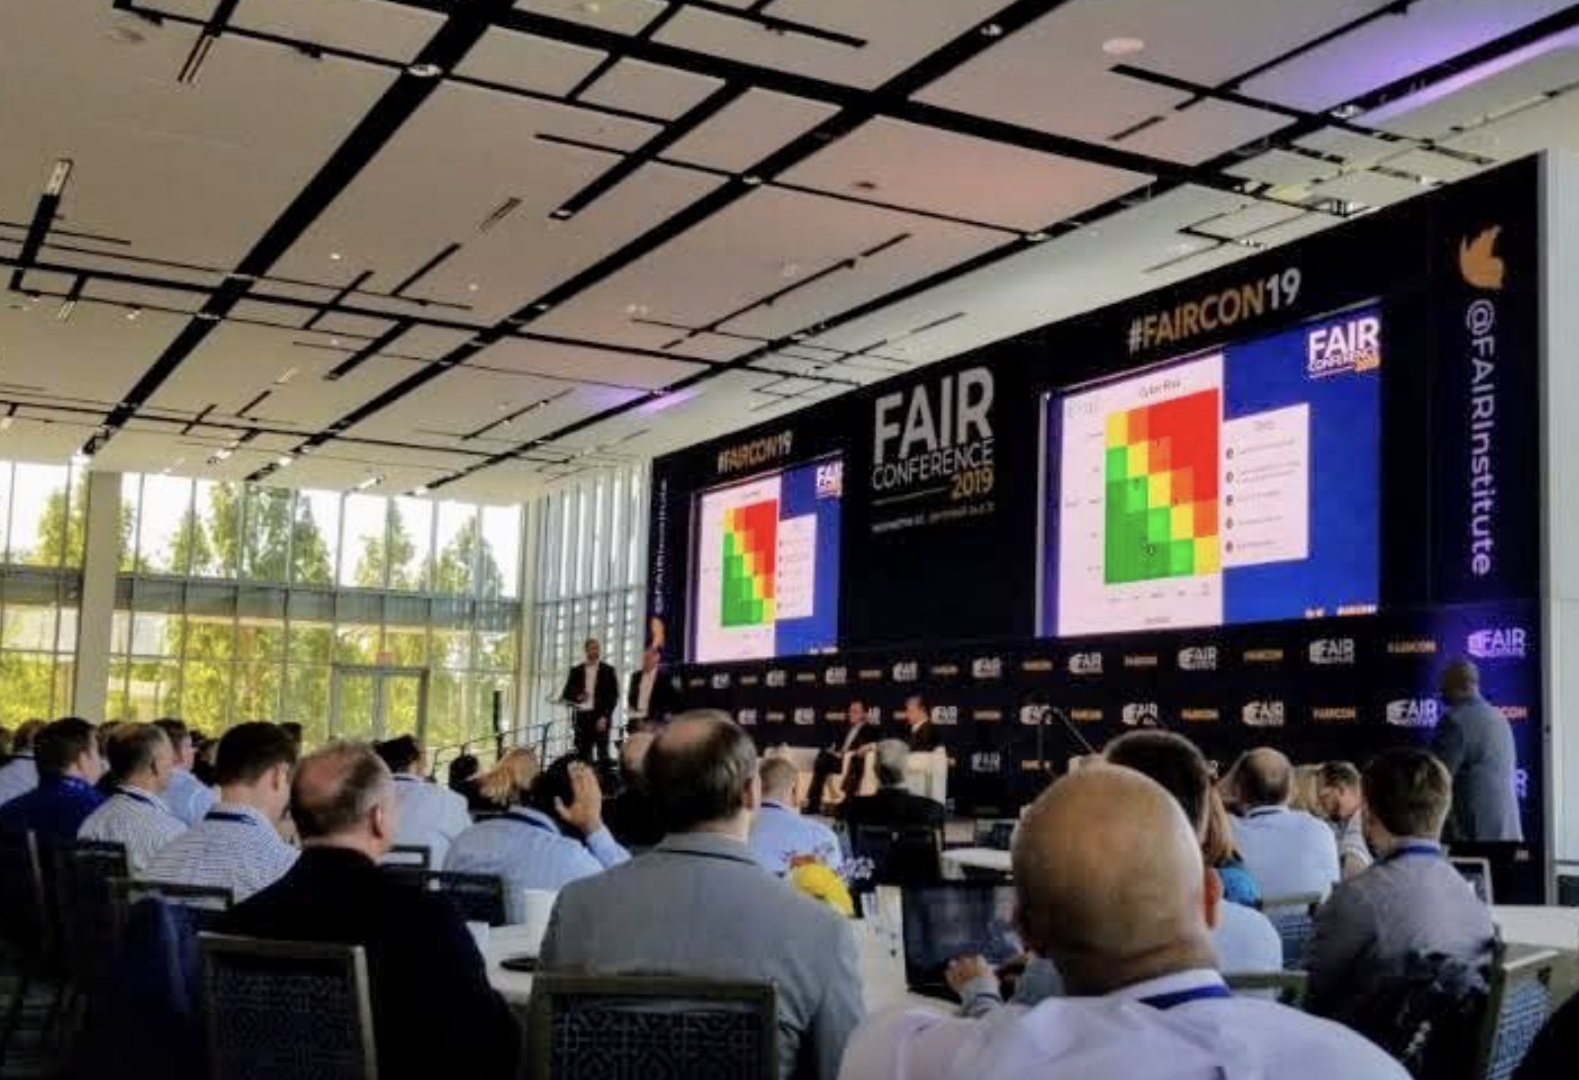 FAIR Conference 2019 Day 2: Advice on 3rd Party Risk, Pitching the Board, ERM, IRM and Messy Data from Doug Hubbard, Gartner and More